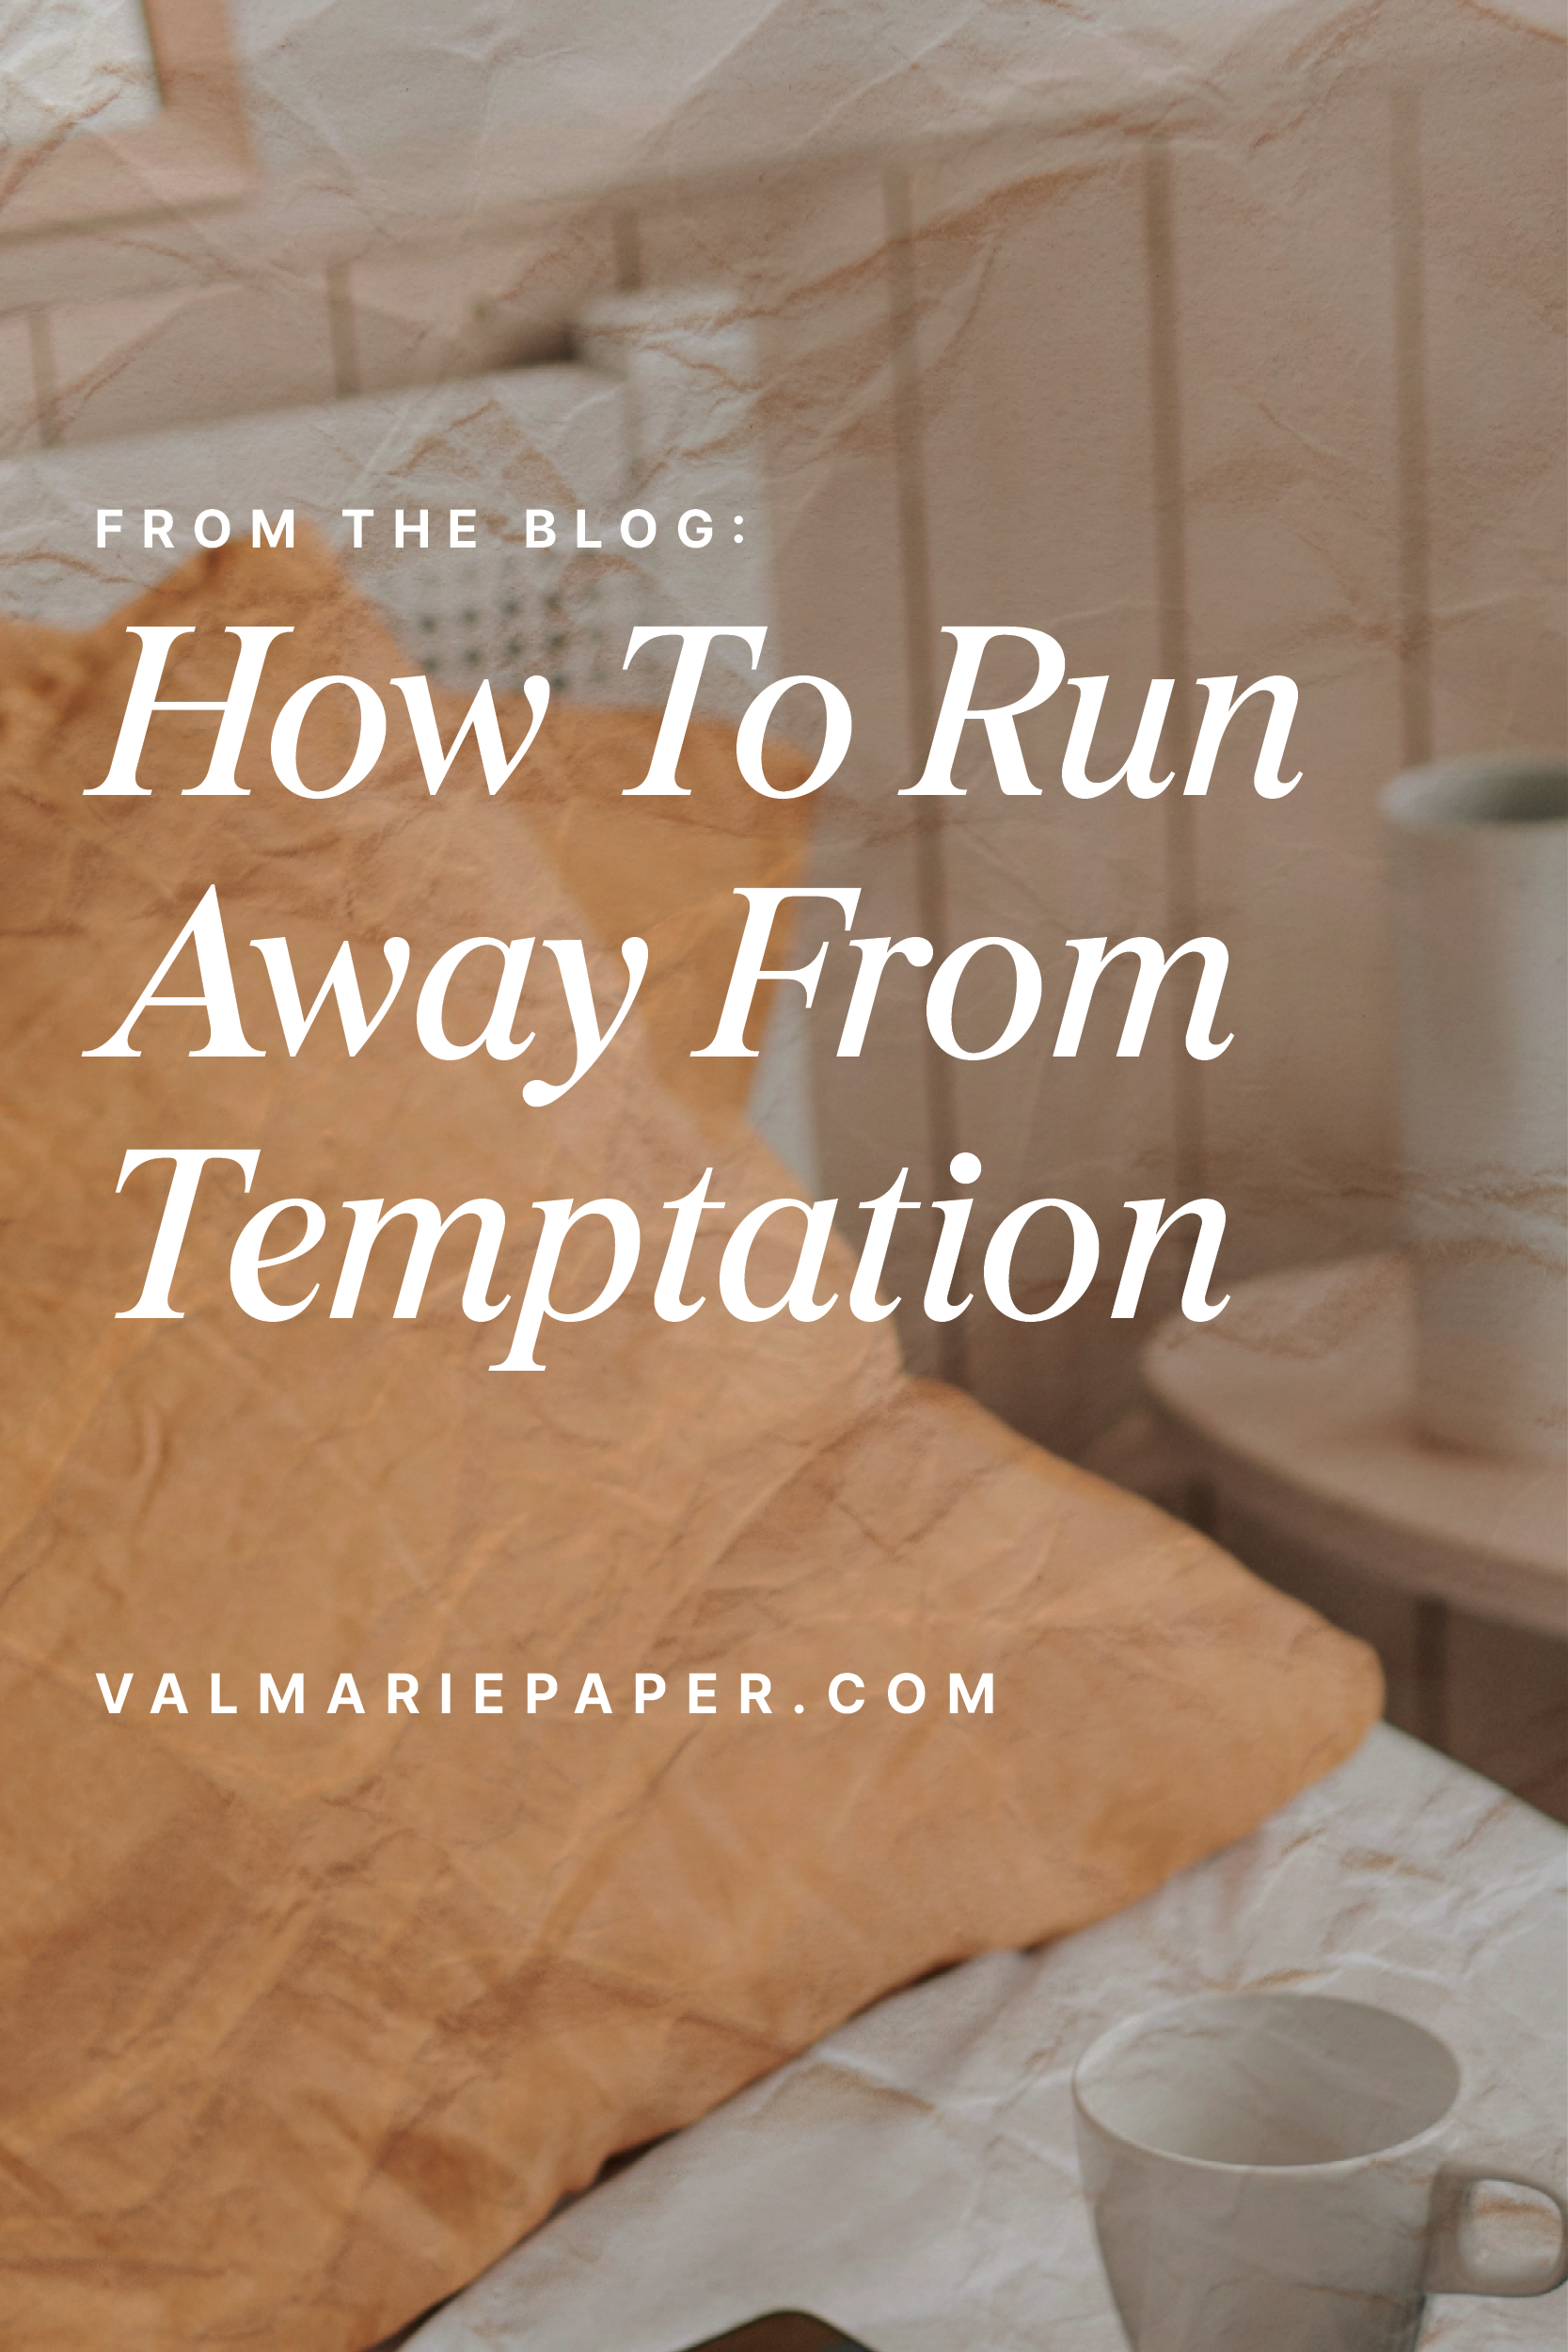 How to handle temptation by Valerie Woerner, prayer journal, women's ministry, prayer, meditation, how to make a prayer journal, prayer warrior, war room, Bible study, tools, prayer notebook, how to pray, distance, distant from god, temptation